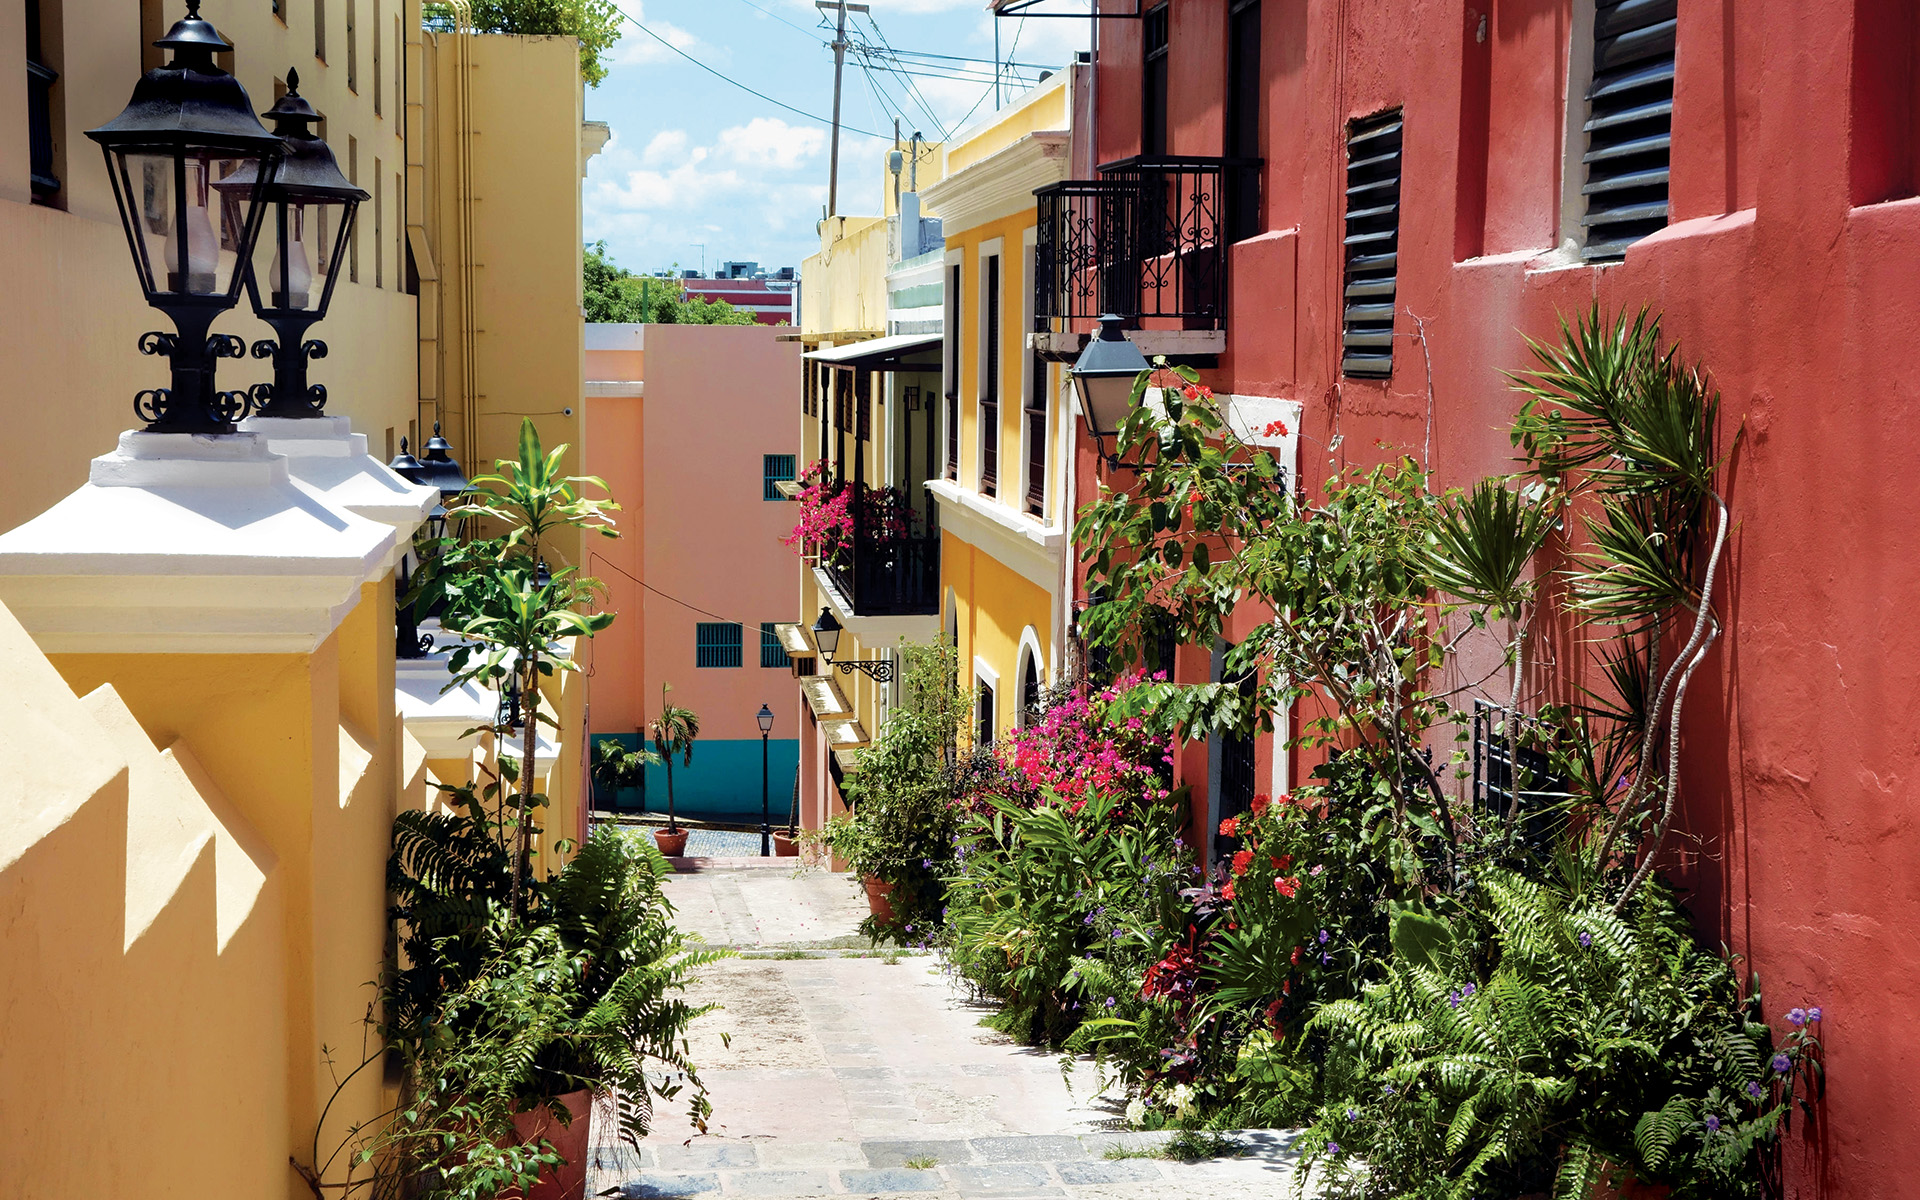 The Ultimate Art Lovers' Guide to Puerto Rico - Galerie